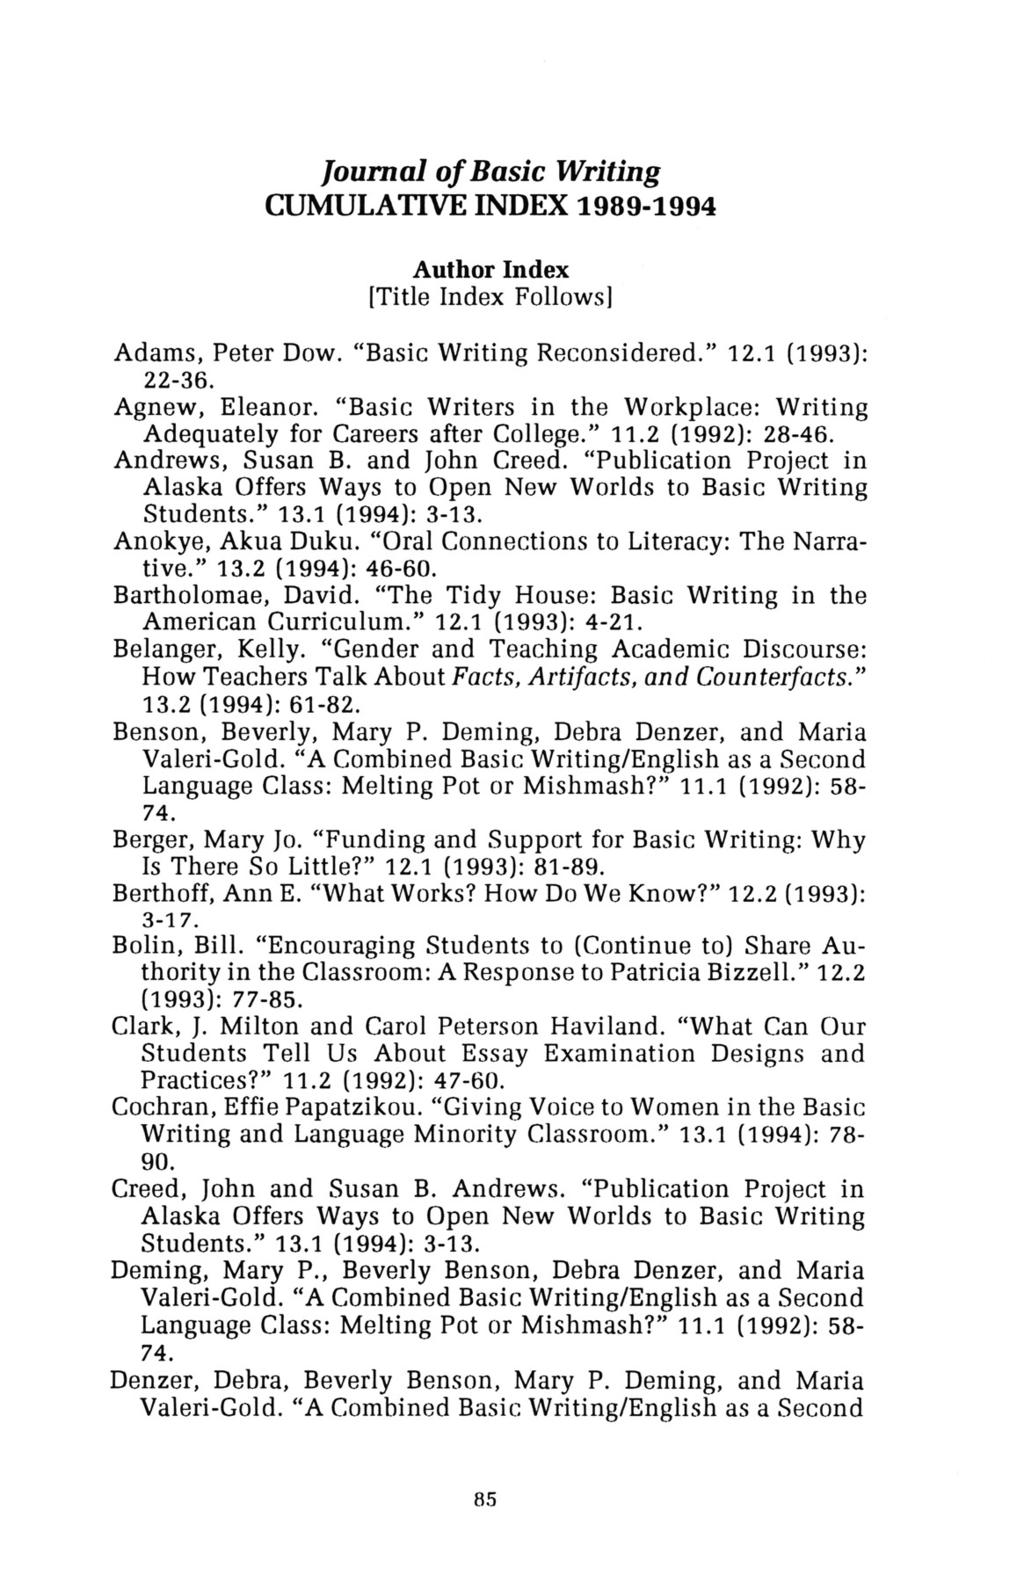 Journal of Basic Writing CUMULATIVE INDEX 1989-1994 Author Index [Title Index Follows) Adams, Peter Dow. "Basic Writing Reconsidered." 12.1 (1993): 22-36. Agnew, Eleanor.